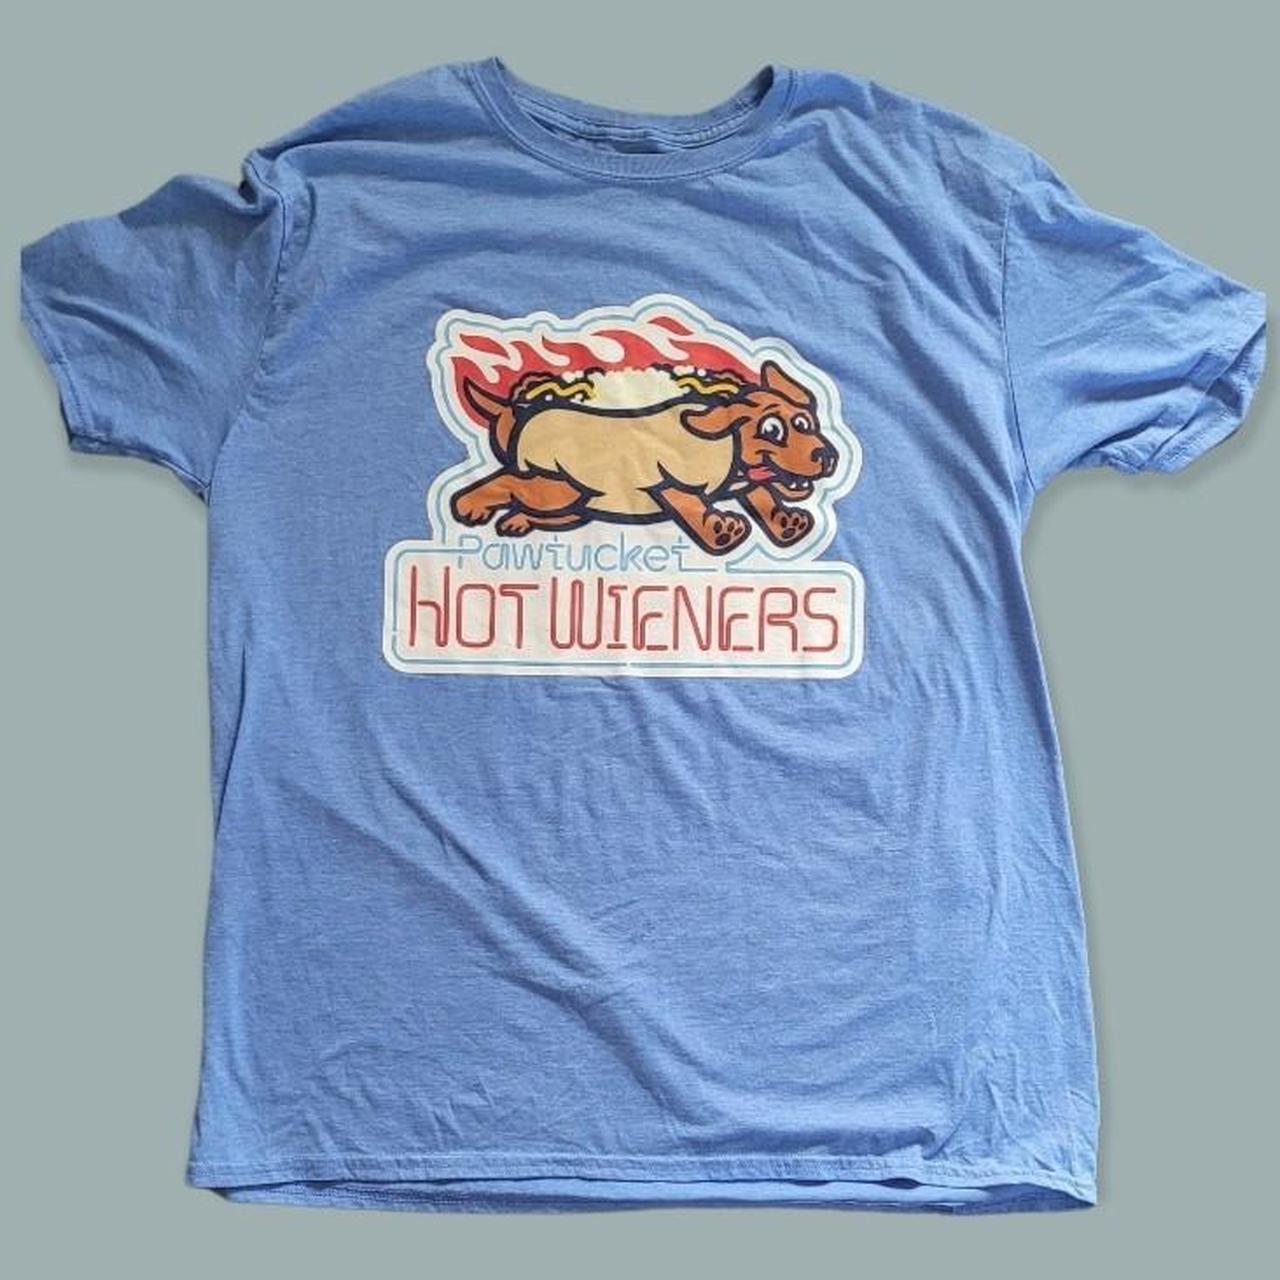 Pawsox shirt based on the one and only game they